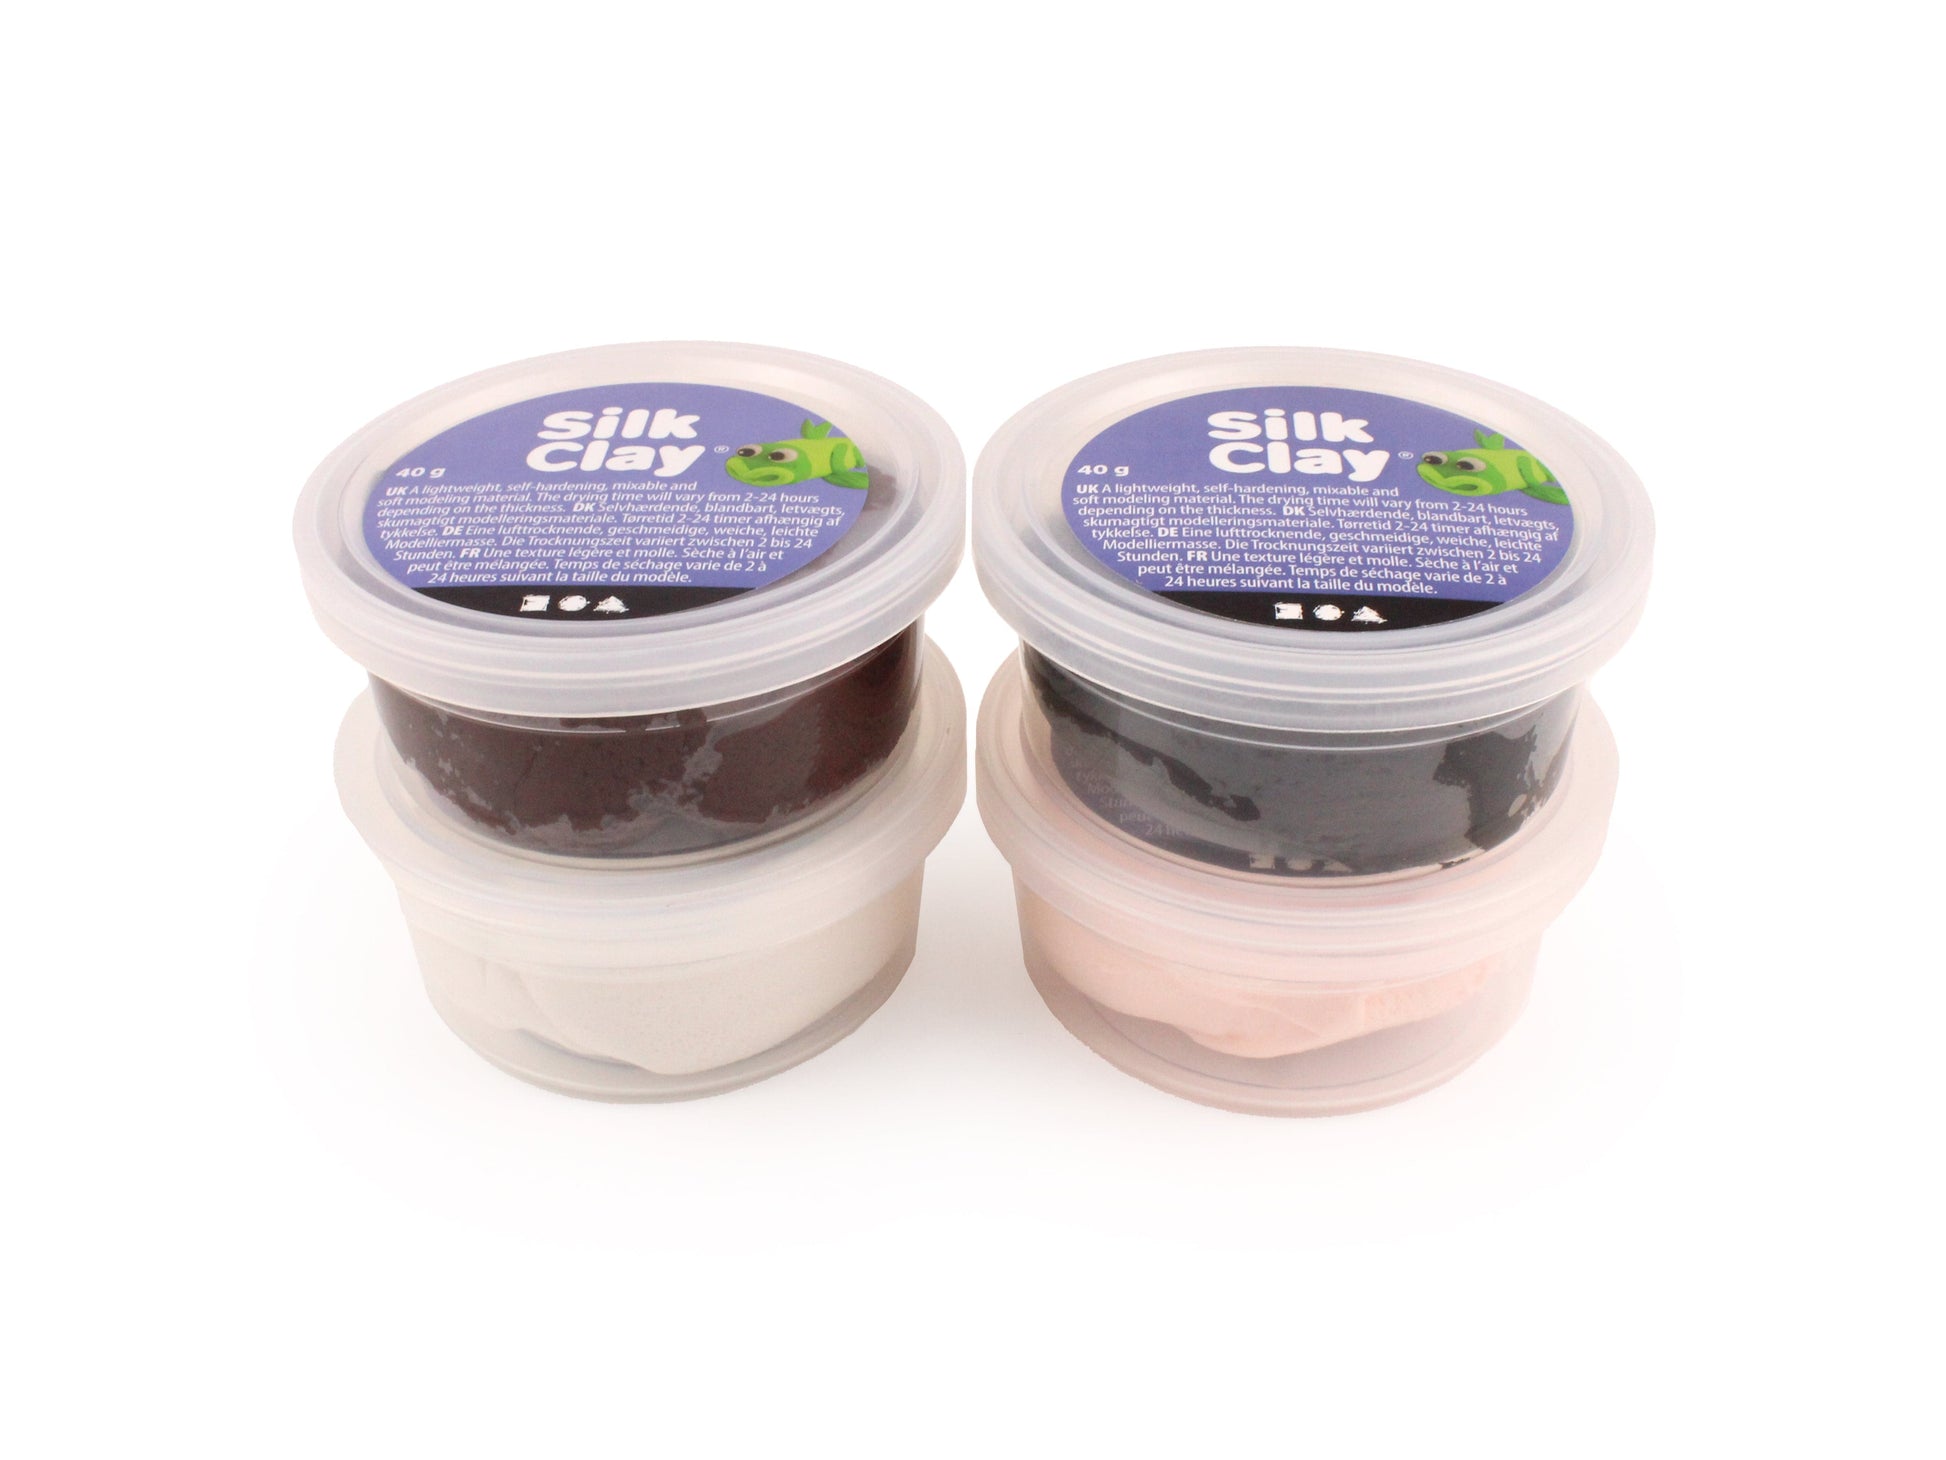 Silk Clay - 40g for beaks, claws, noses etc - various colours - The Makerss